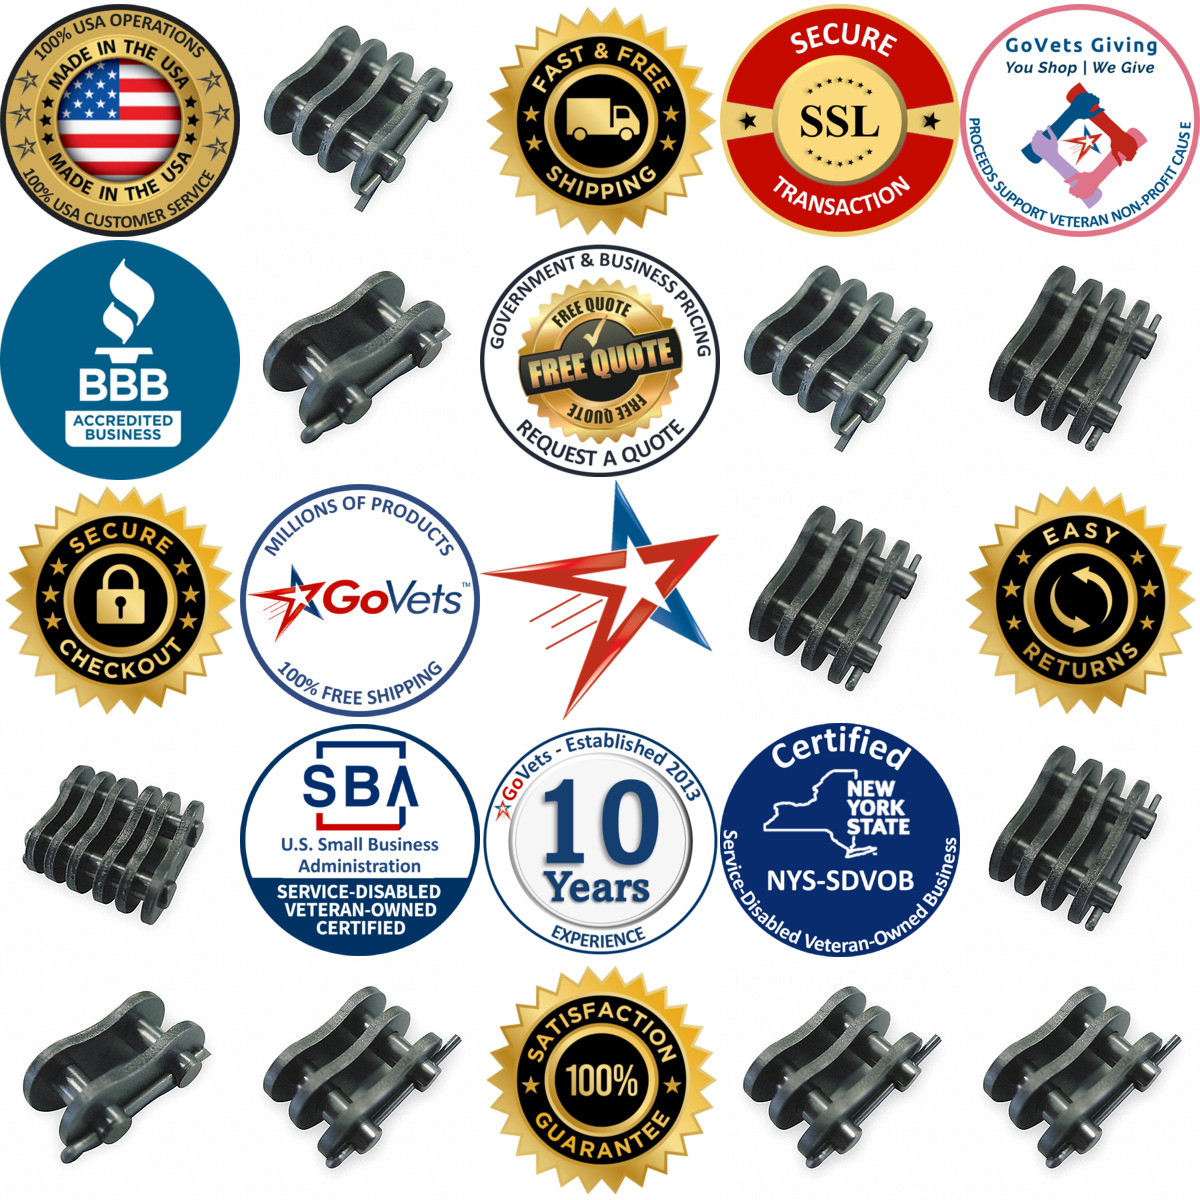 A selection of Leaf Chain Clevis Connectors products on GoVets